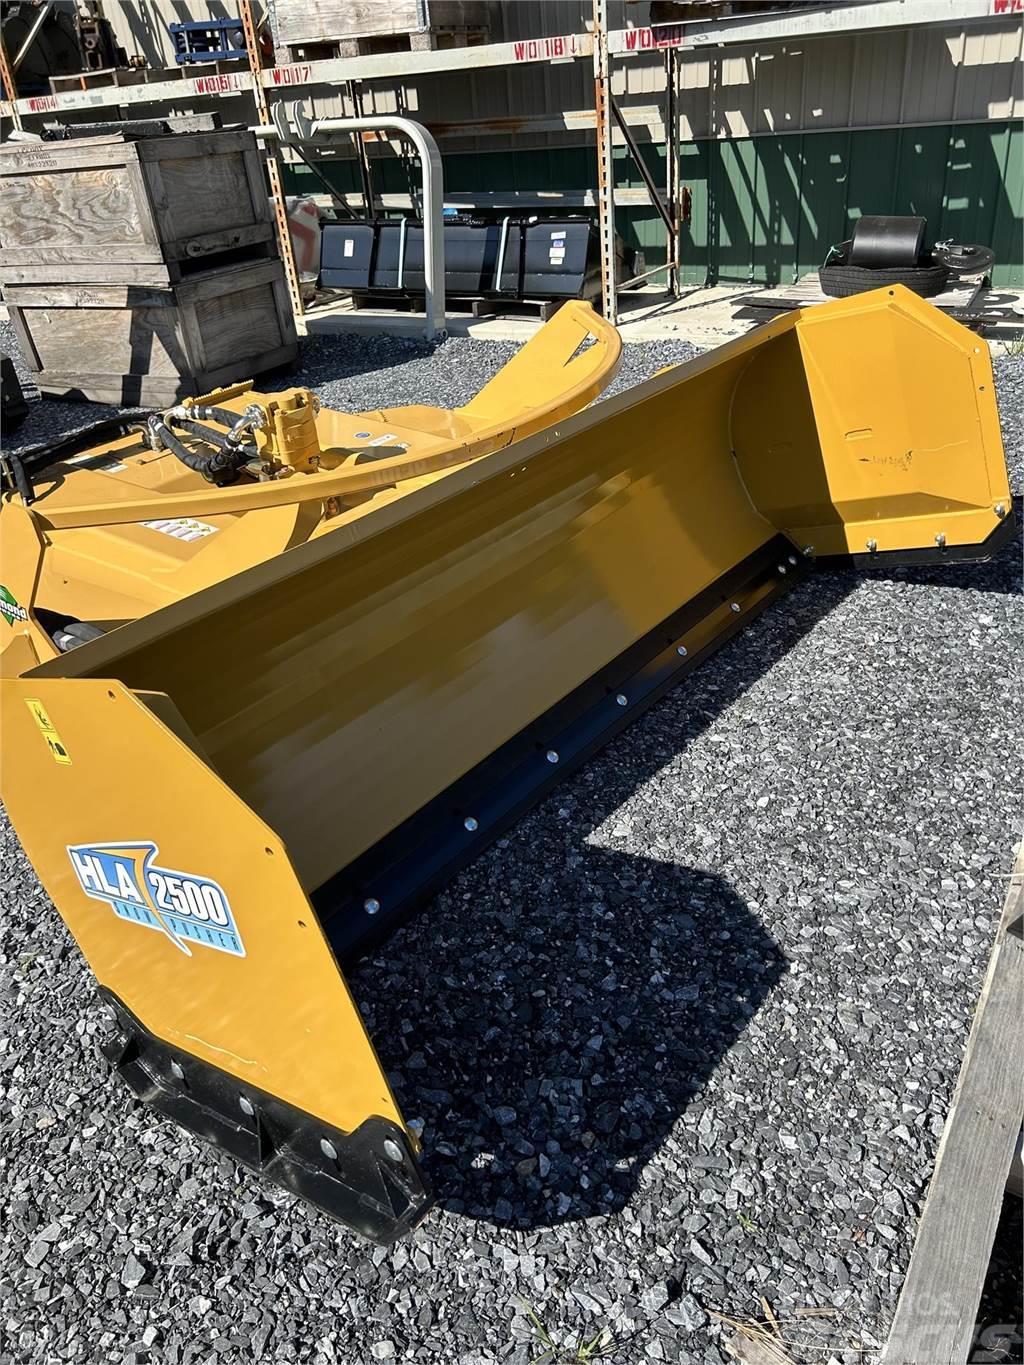 HLA 2500 SERIES 96 SNOW PUSHER Snow blades and plows